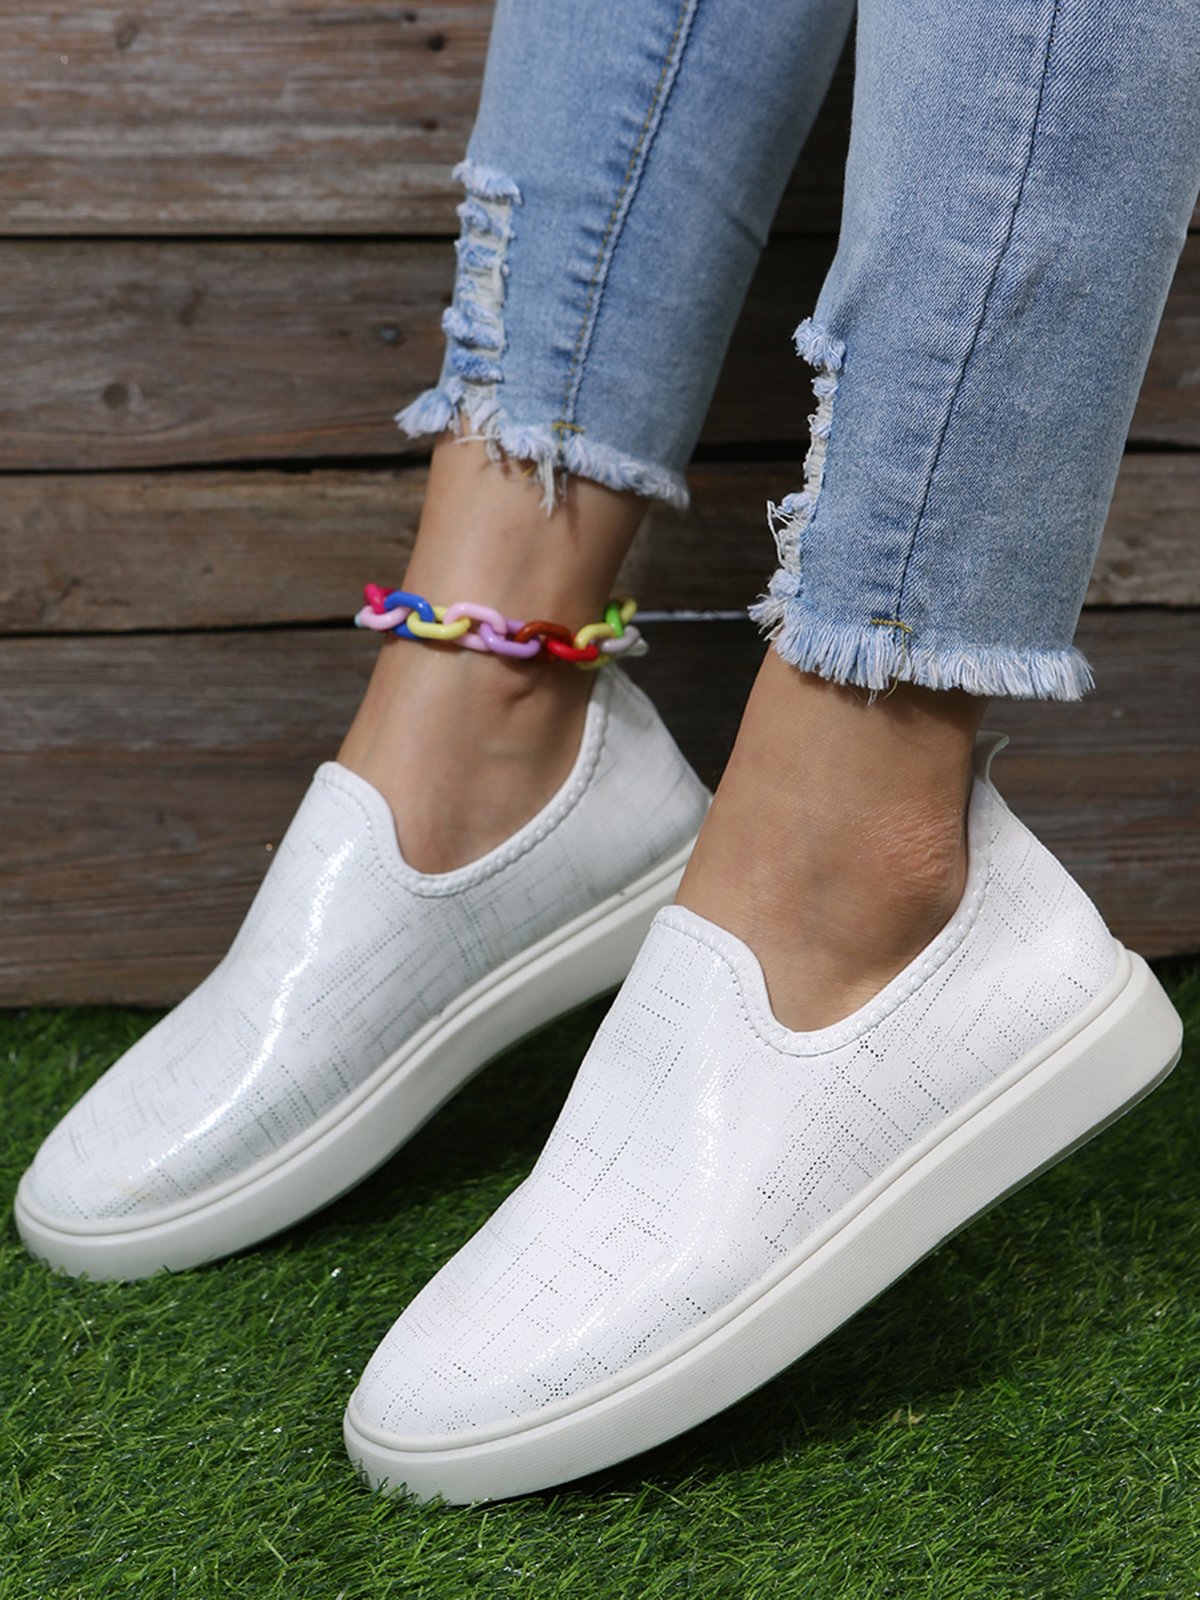 Summer Flats/loafers